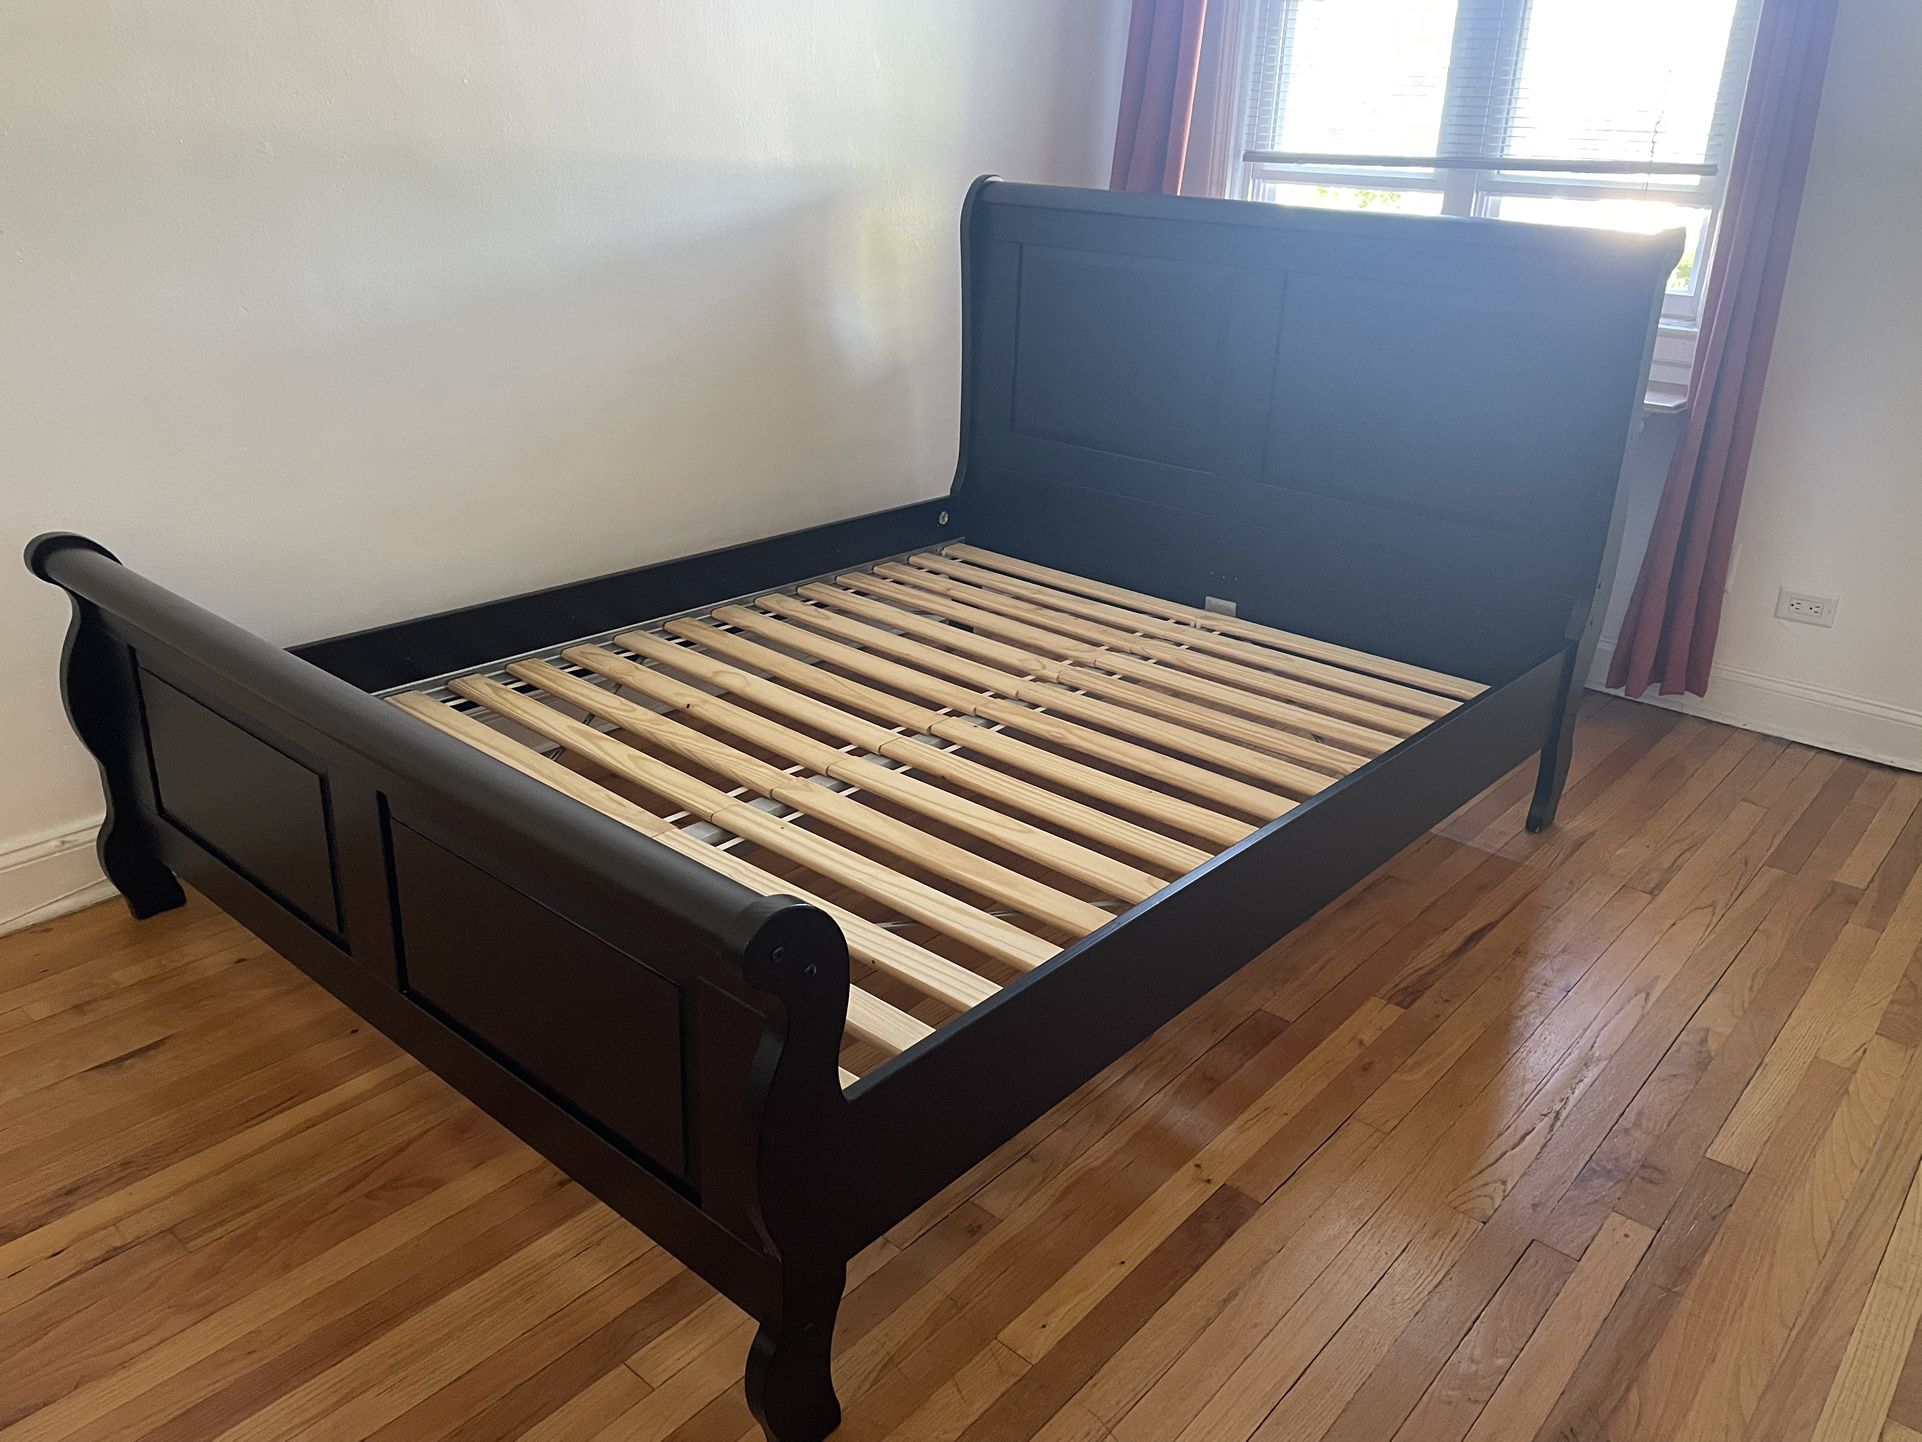 ***Great Queen Bed Frame For Sale $200***